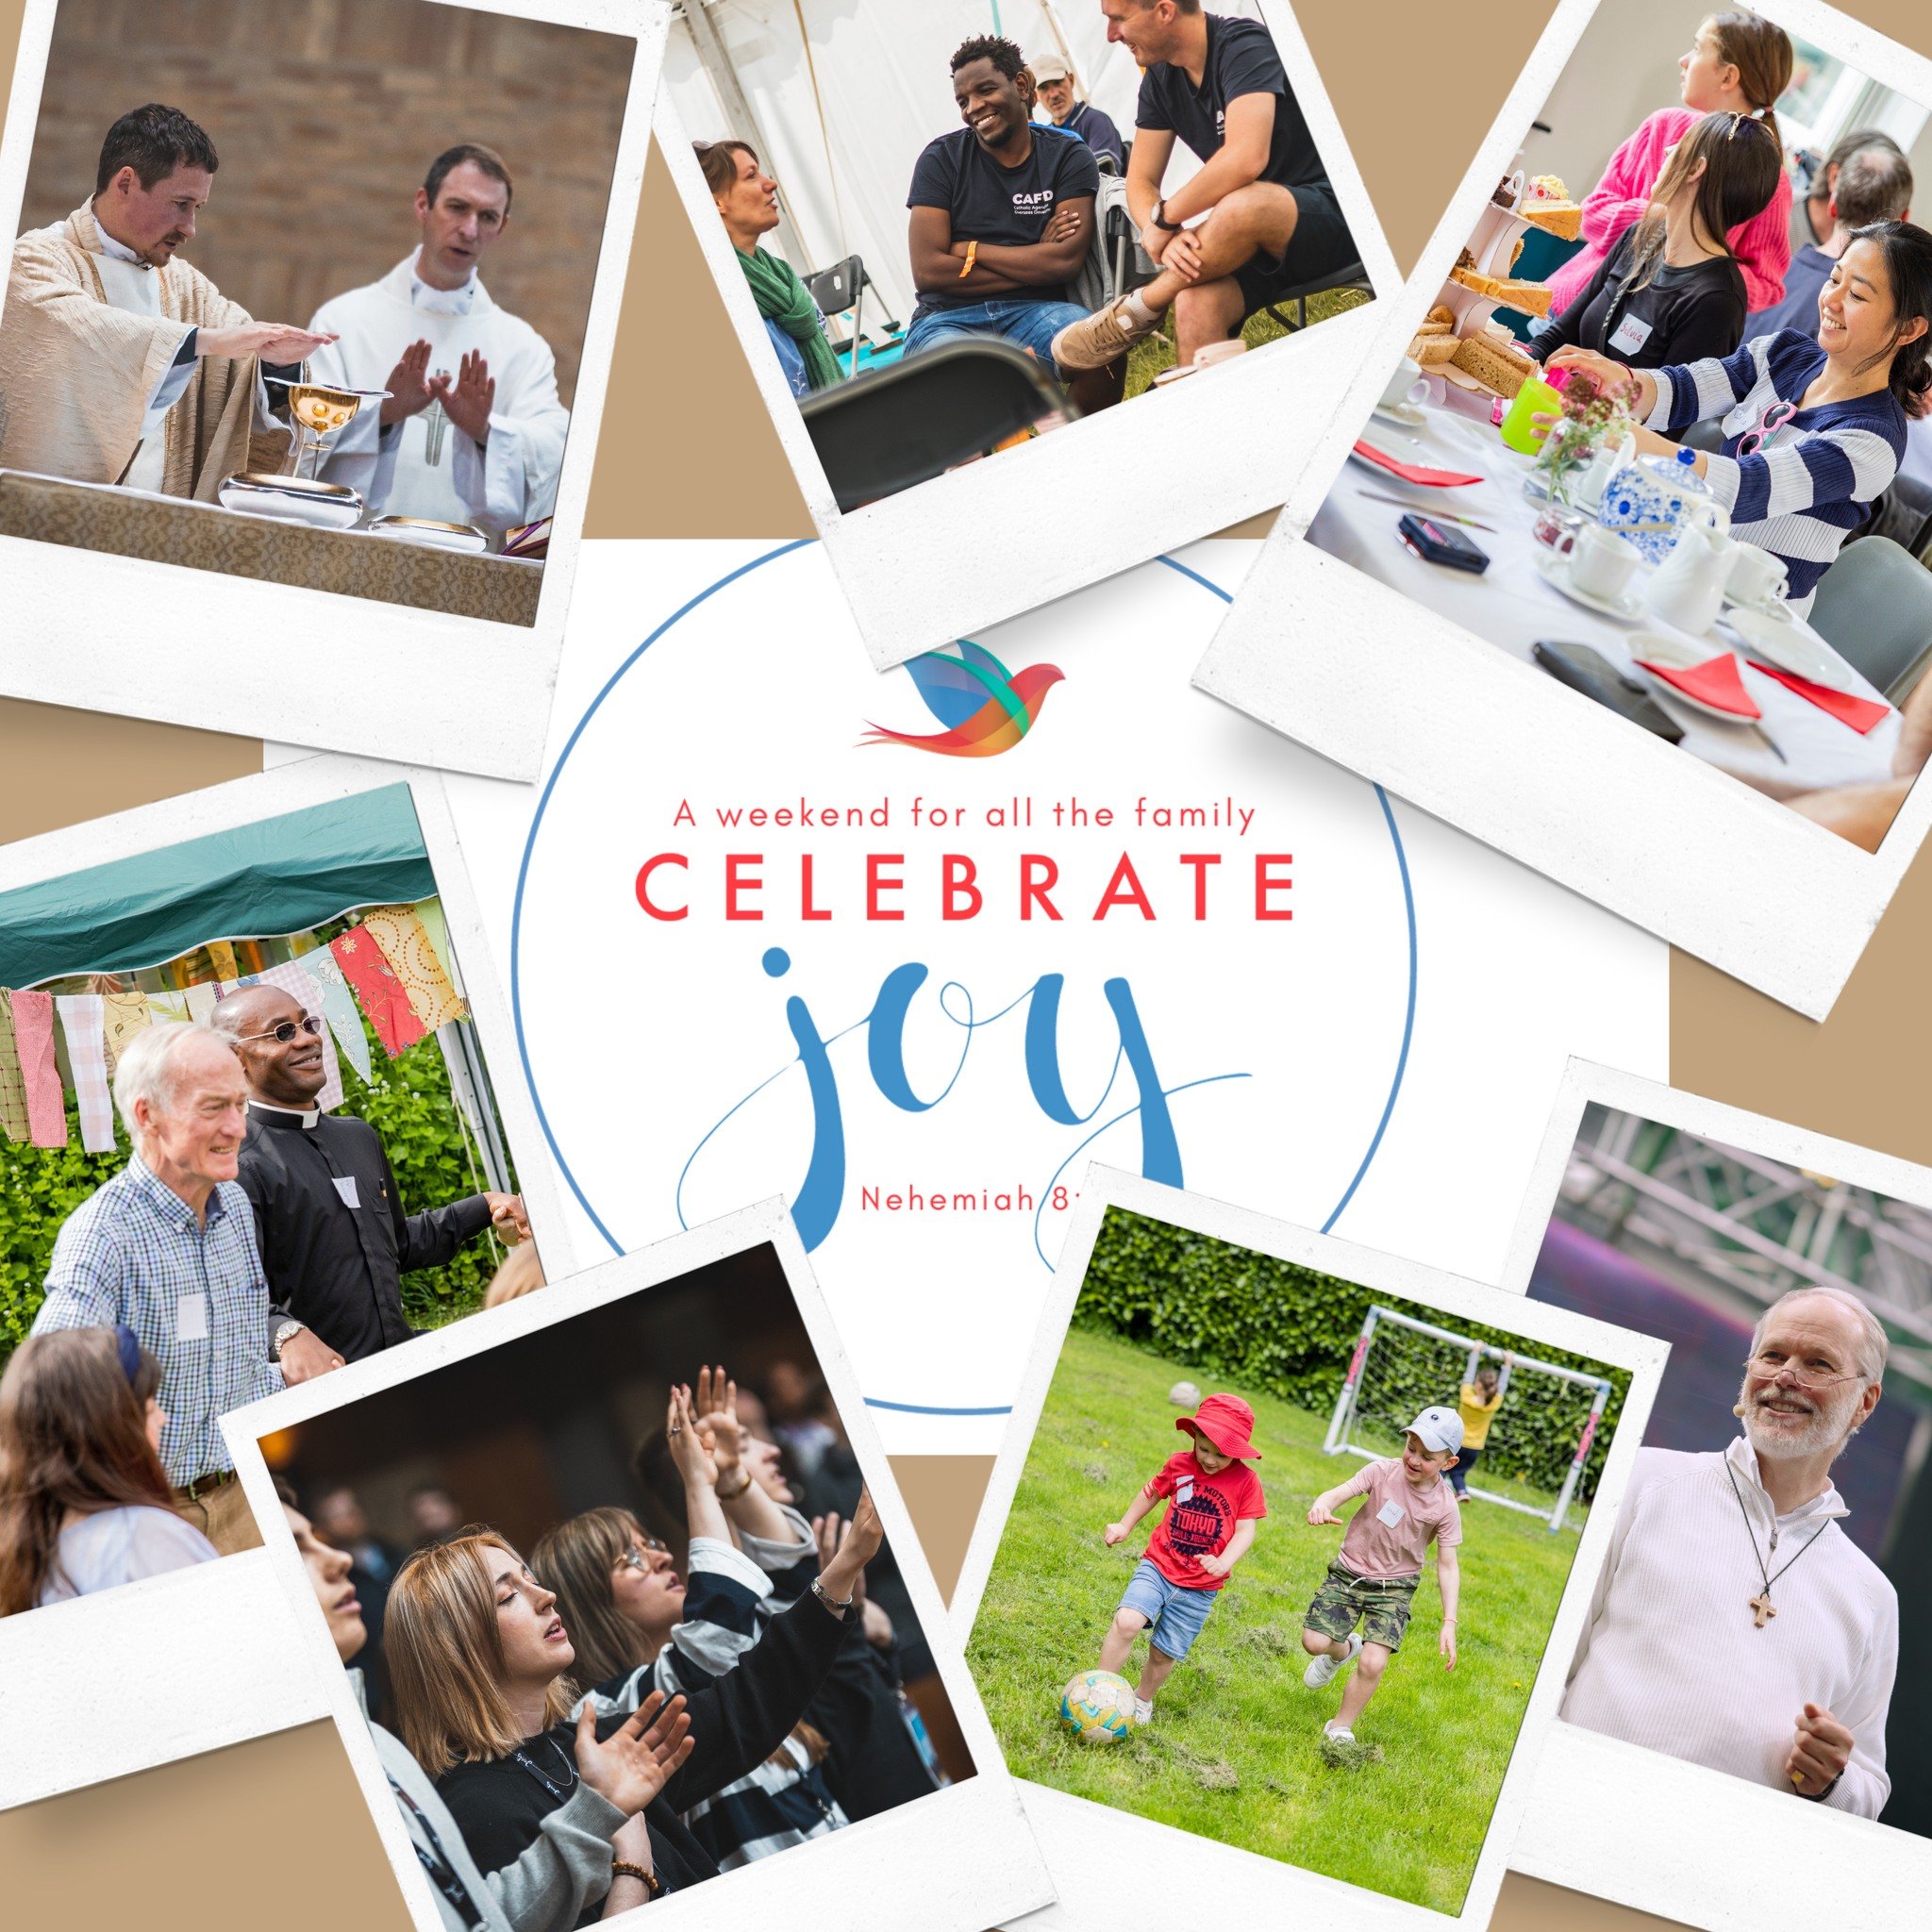 Wondering what we might get up to at CELEBRATE Joy? Here's a sneak peak!

Don't miss out! Buy your ticket(s) today at www.celebratetrust.org/joy